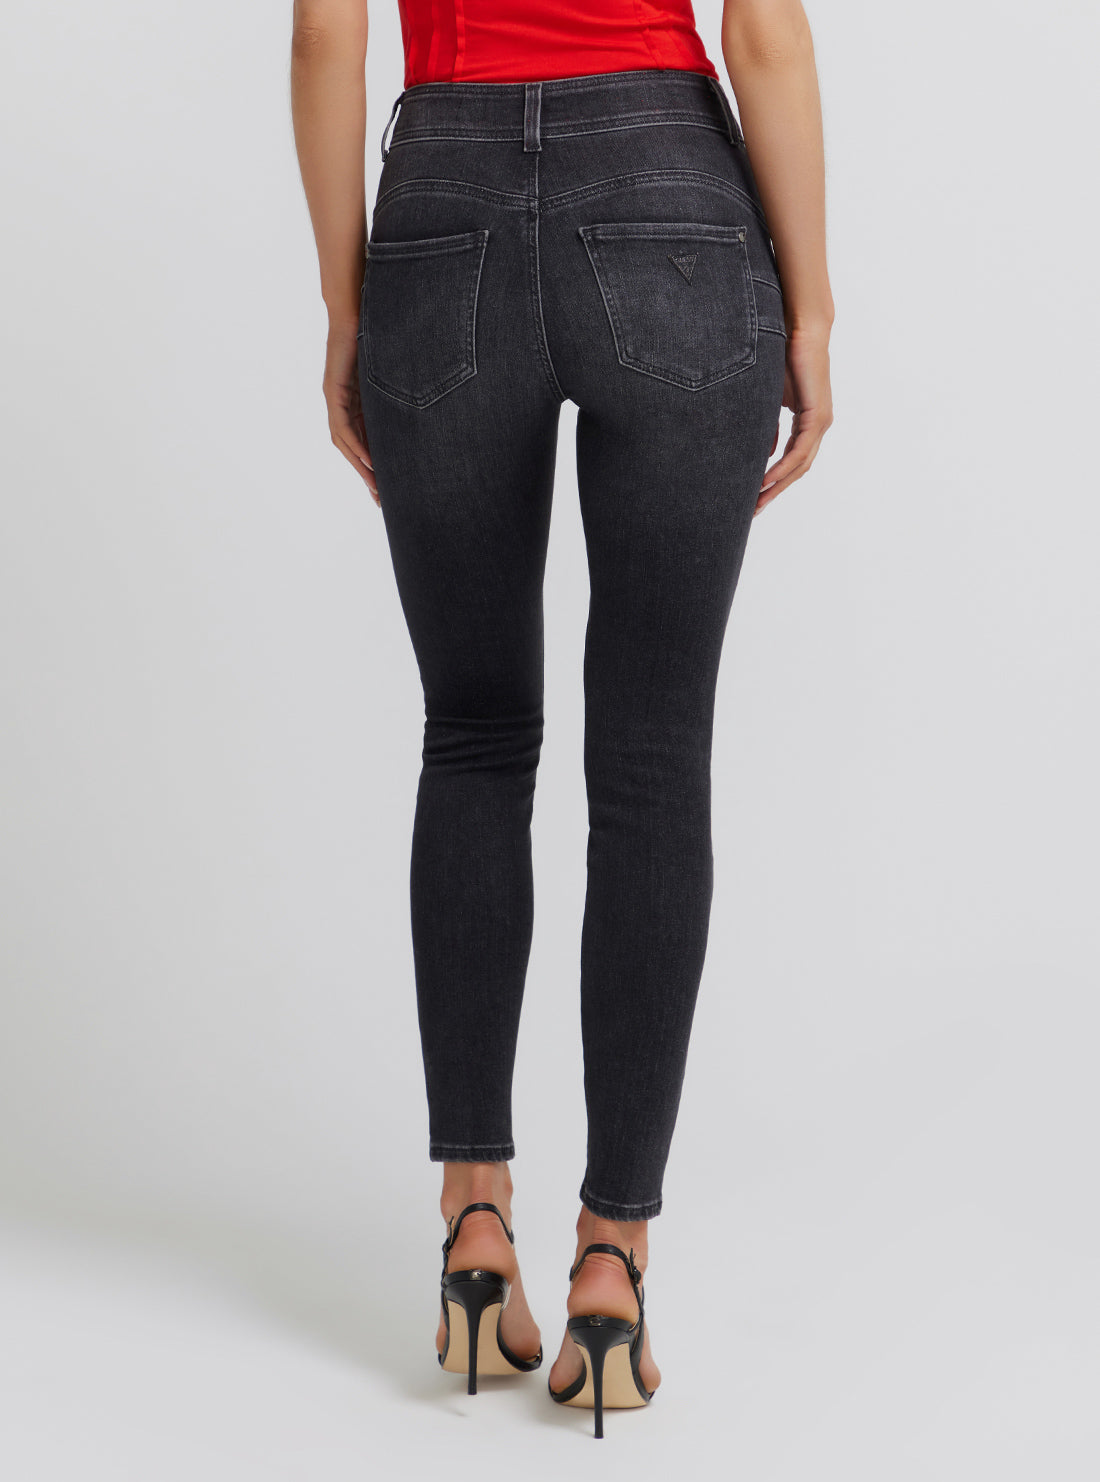 GUESS Women's Eco Mid-Rise Shape Up Denim Jeans In Station Black Wash W3YA35D52T2 Back View